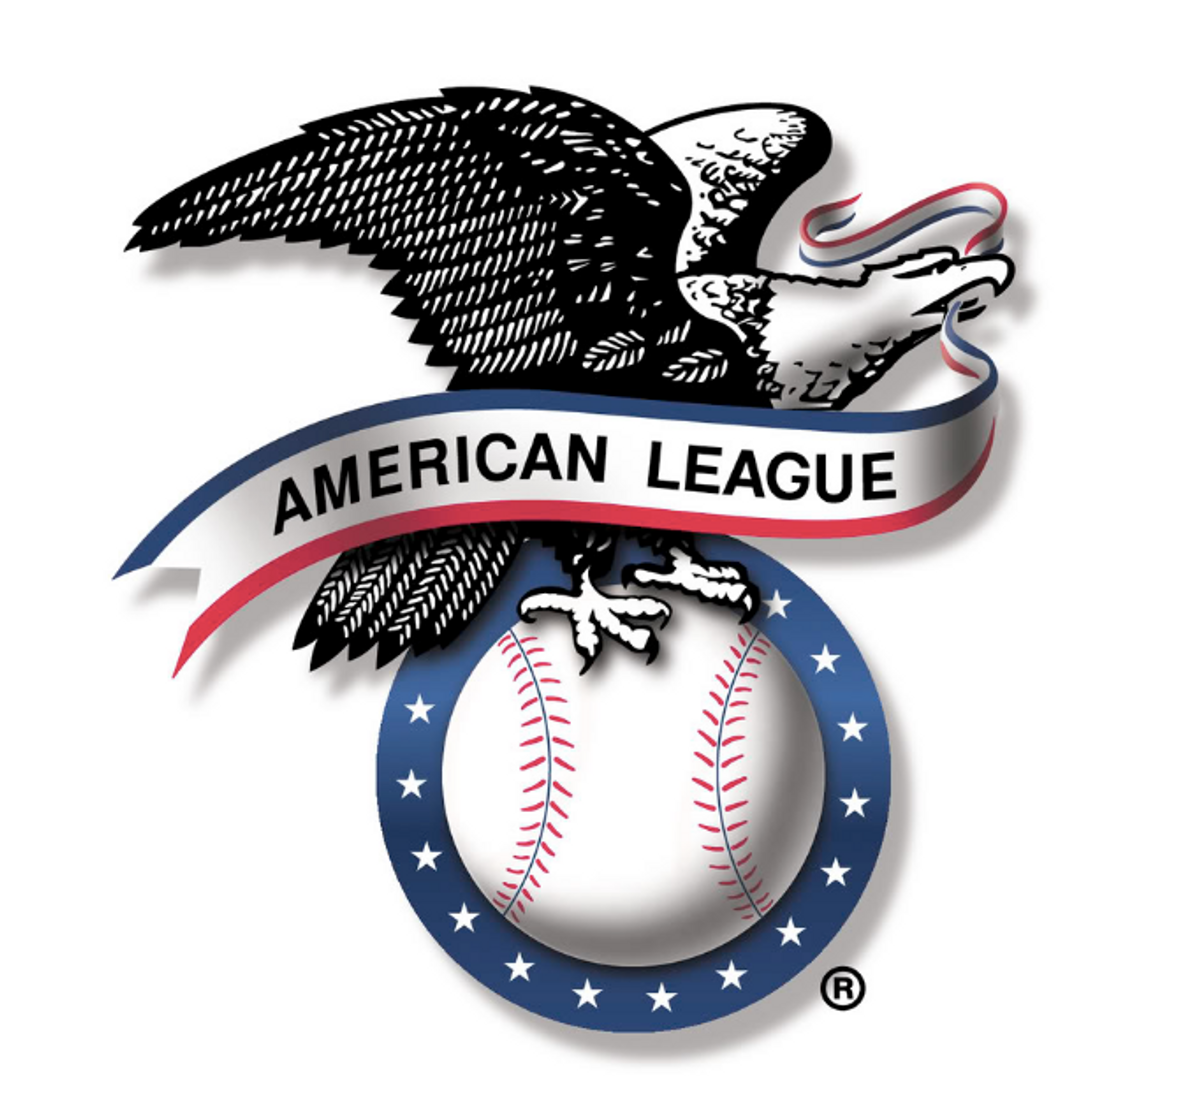 My Prediction on the teams who will make the playoffs from the American League